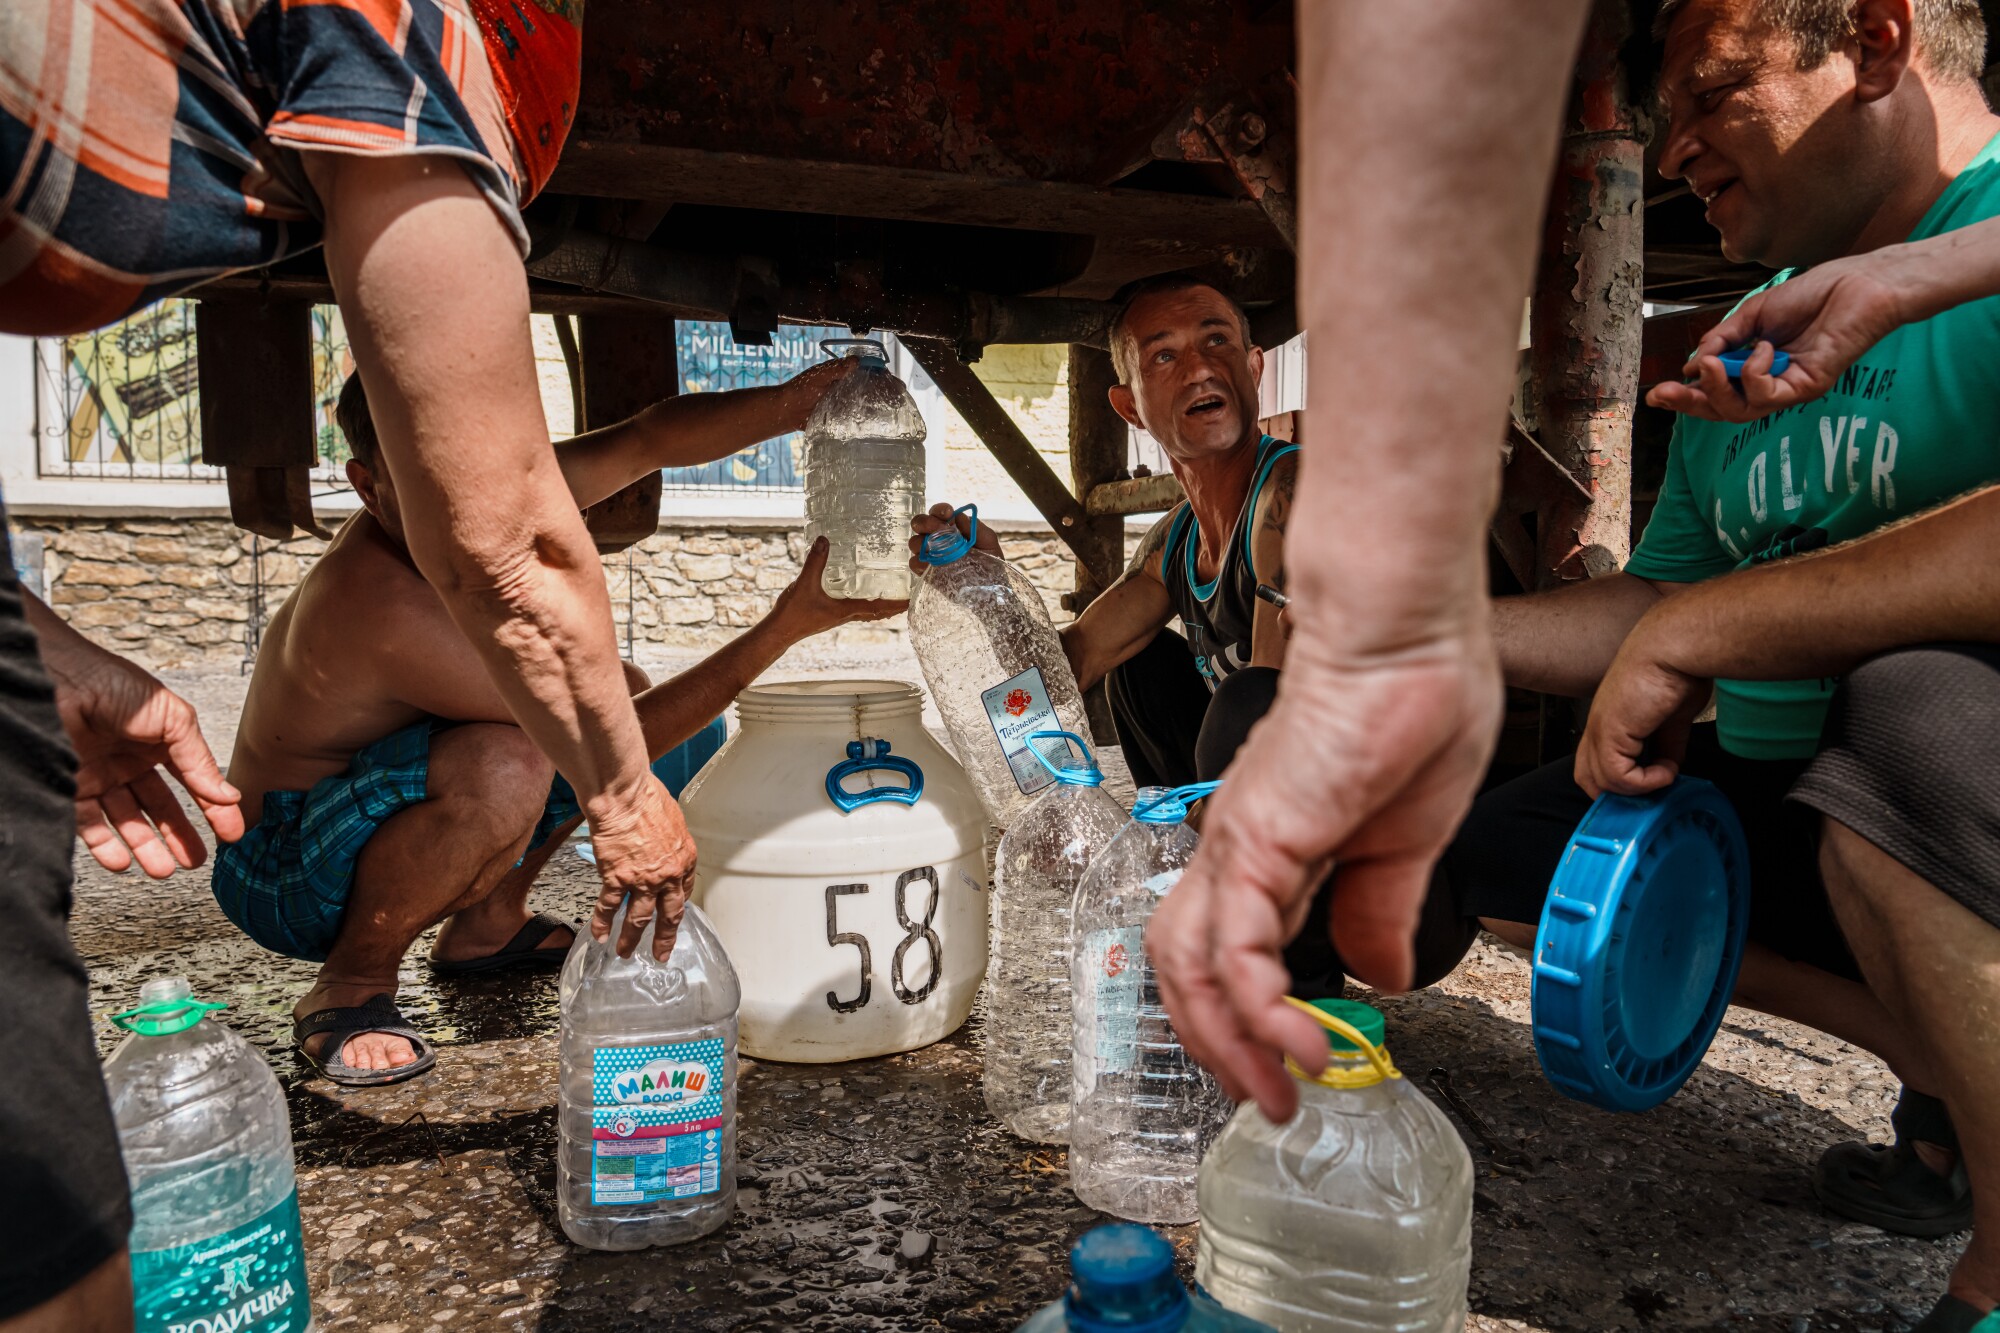 Residents go under the belly of a water truck to fetch water in Siversk, Ukraine.